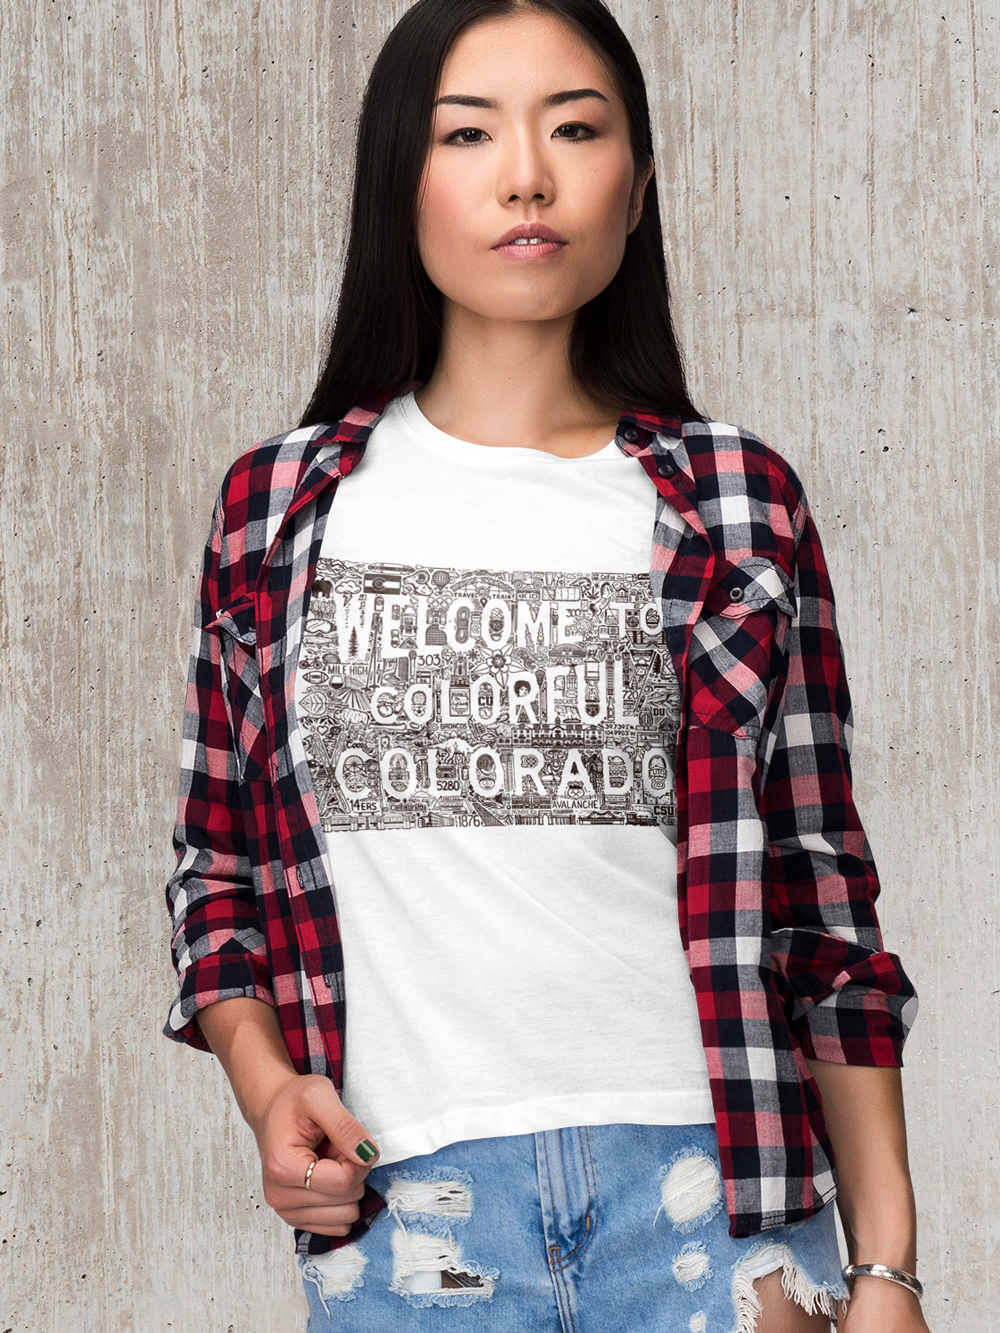 Welcome to Colorado Iconoflage Women's Shirt